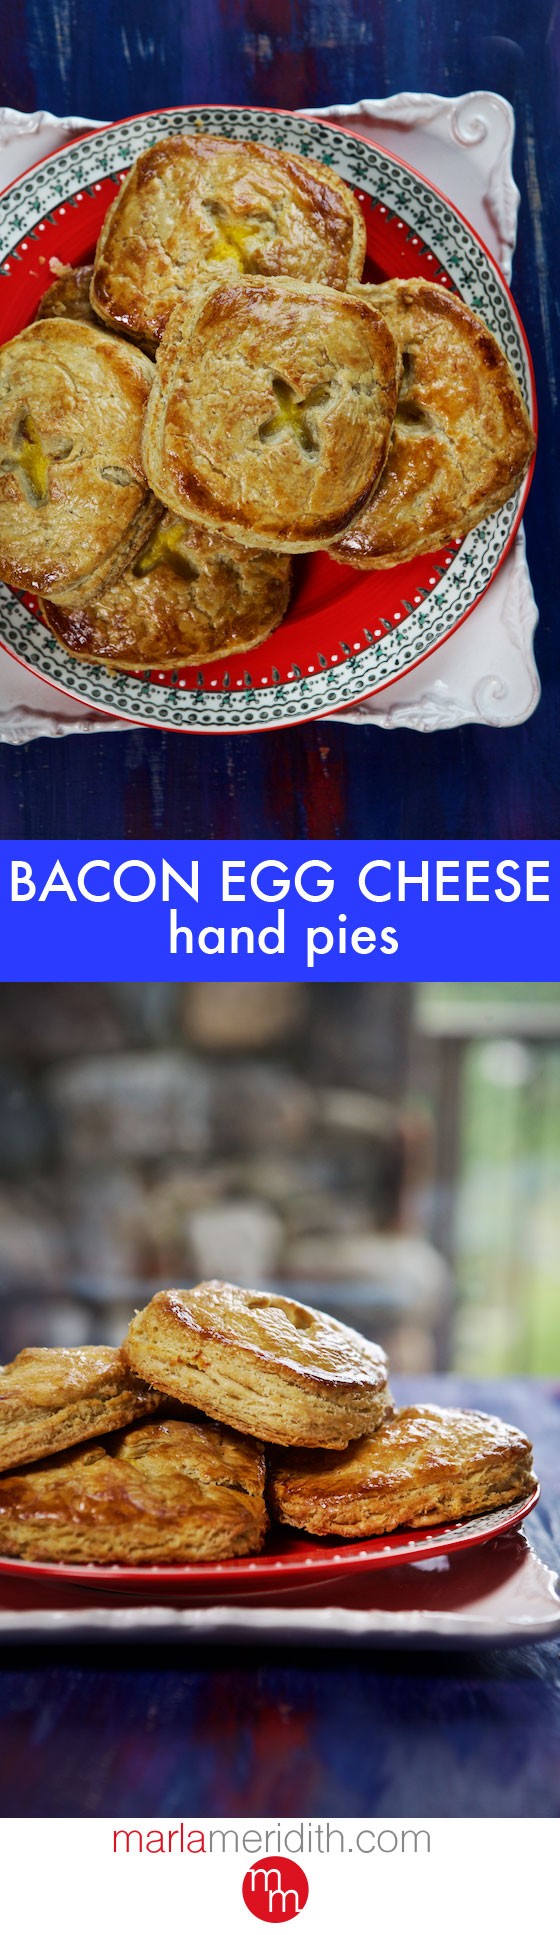 Bacon, Egg & Cheese Hand Pies. This easy & delicious recipe is great for breakfast, brunch & lunch boxes! MarlaMeridith.com ( @marlameridith )